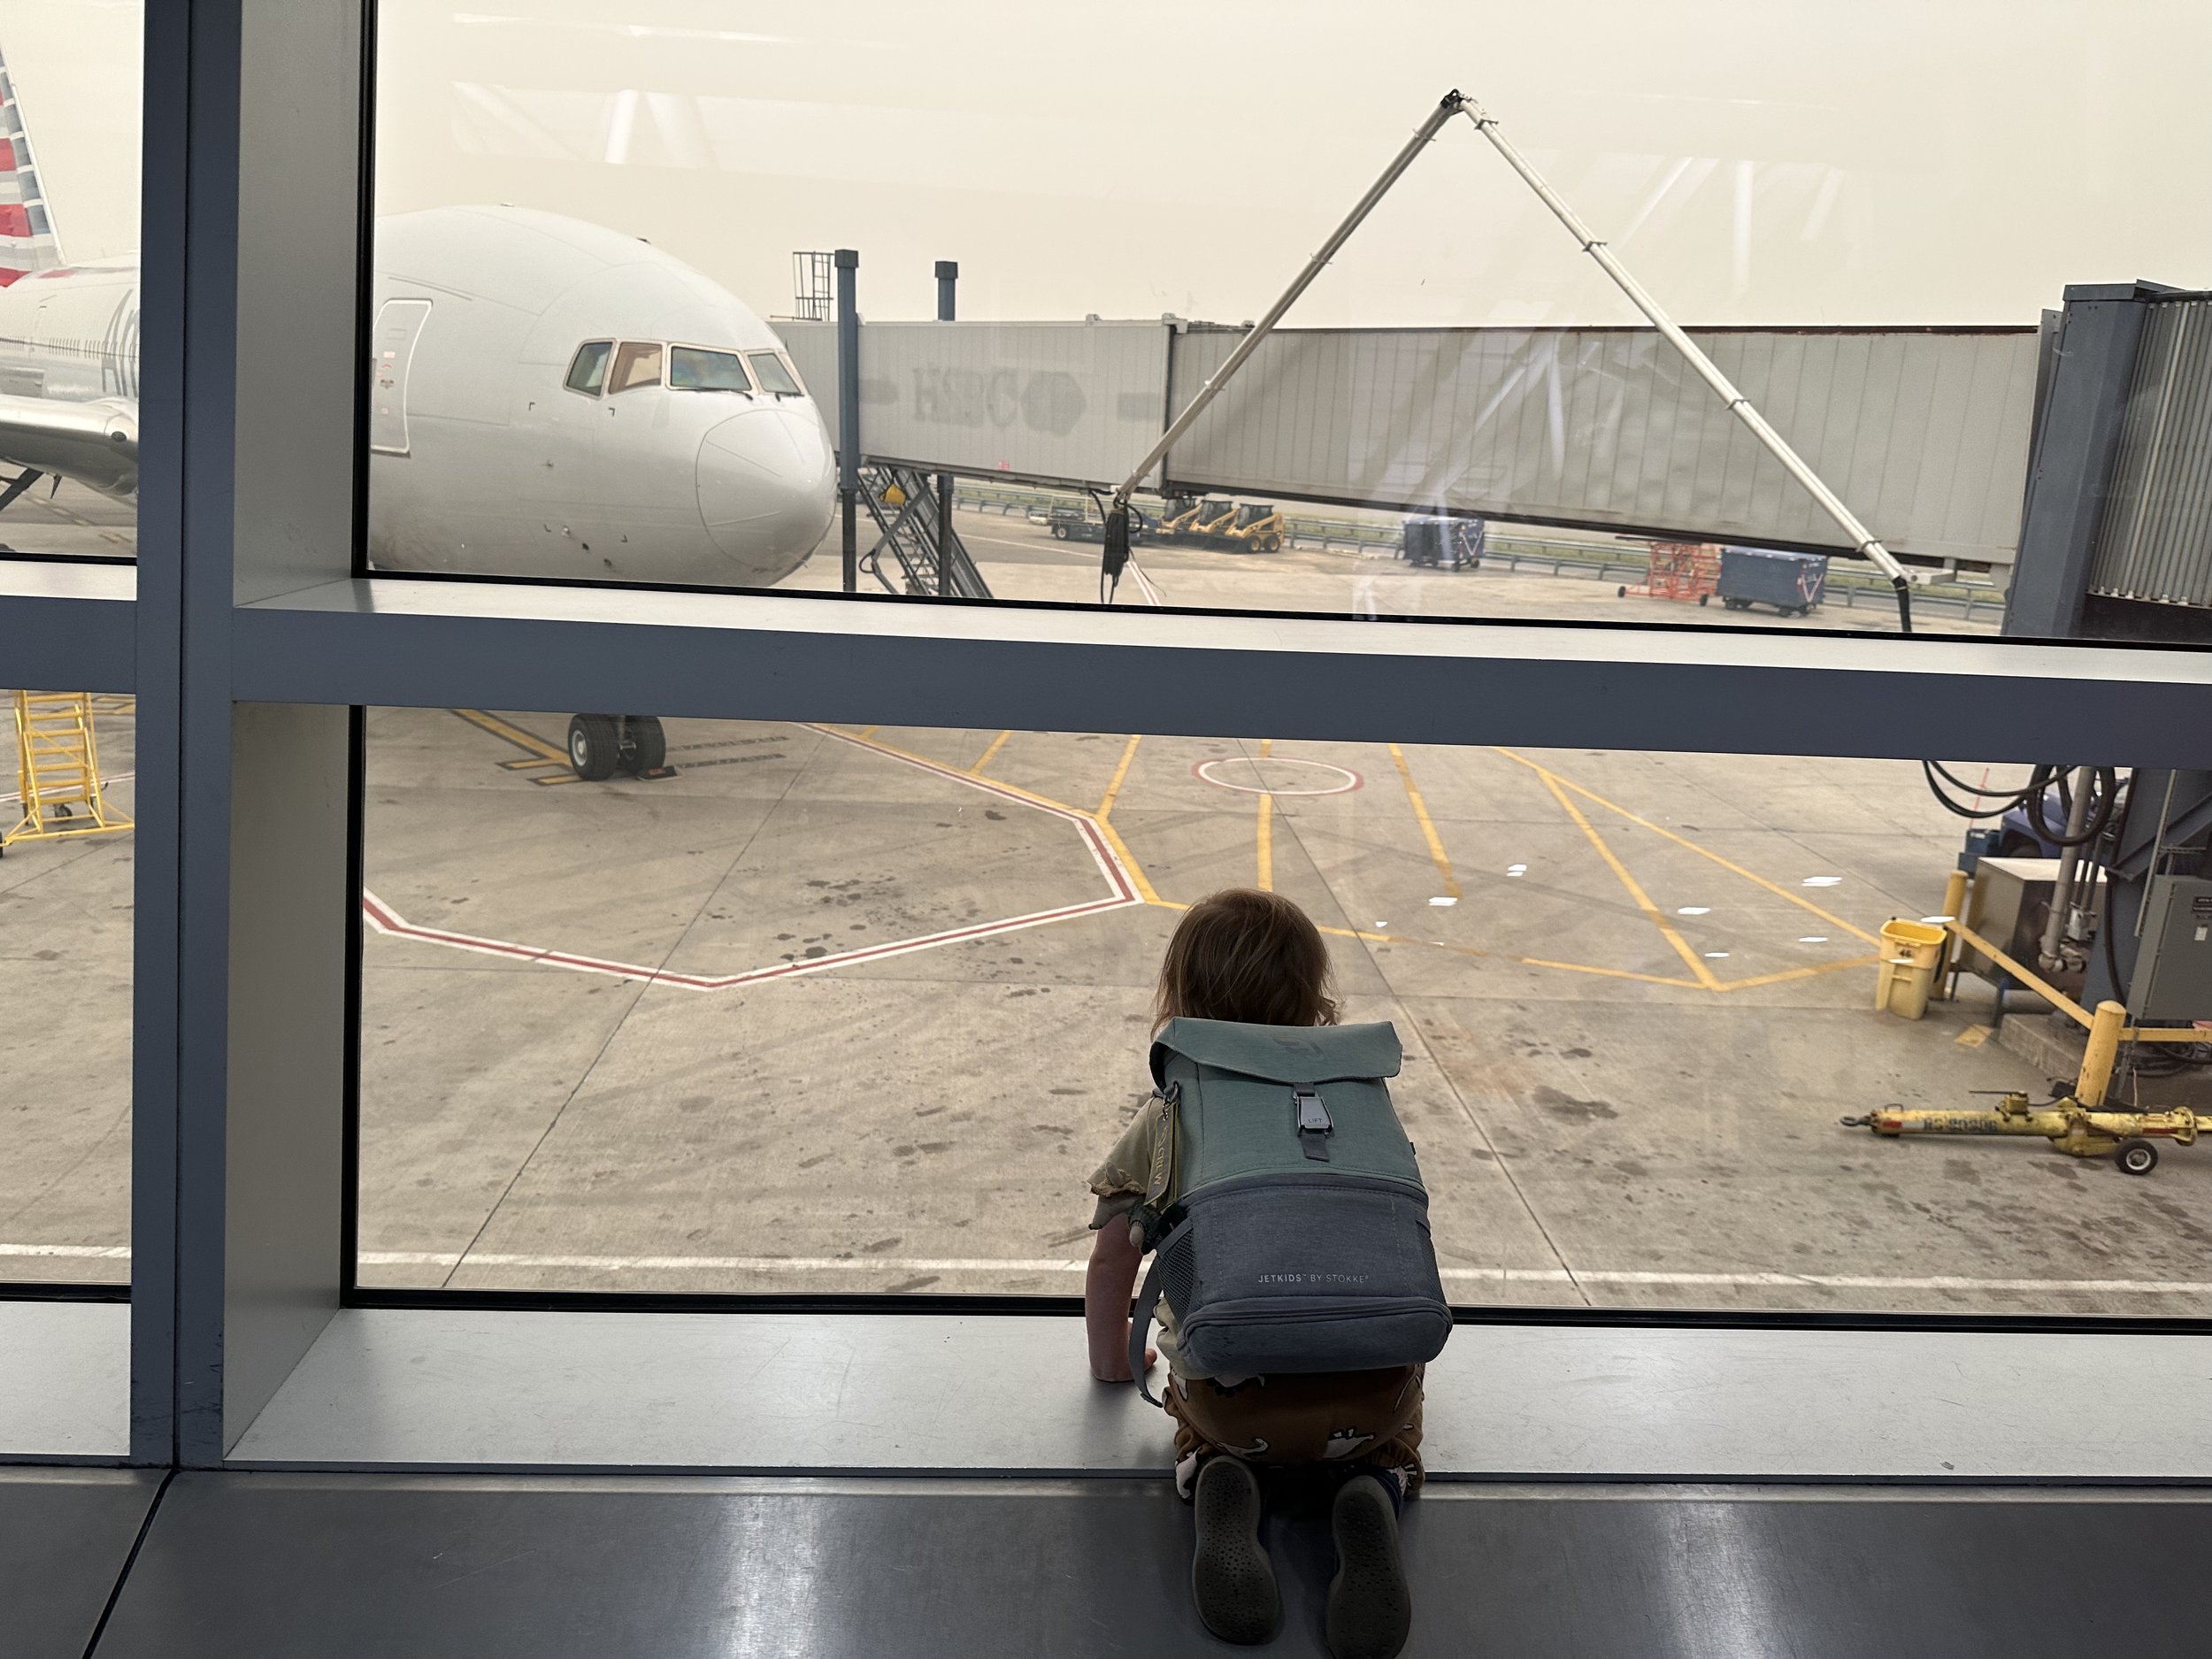 Our Favorite Toddler Plane Activities — Home and on the Way